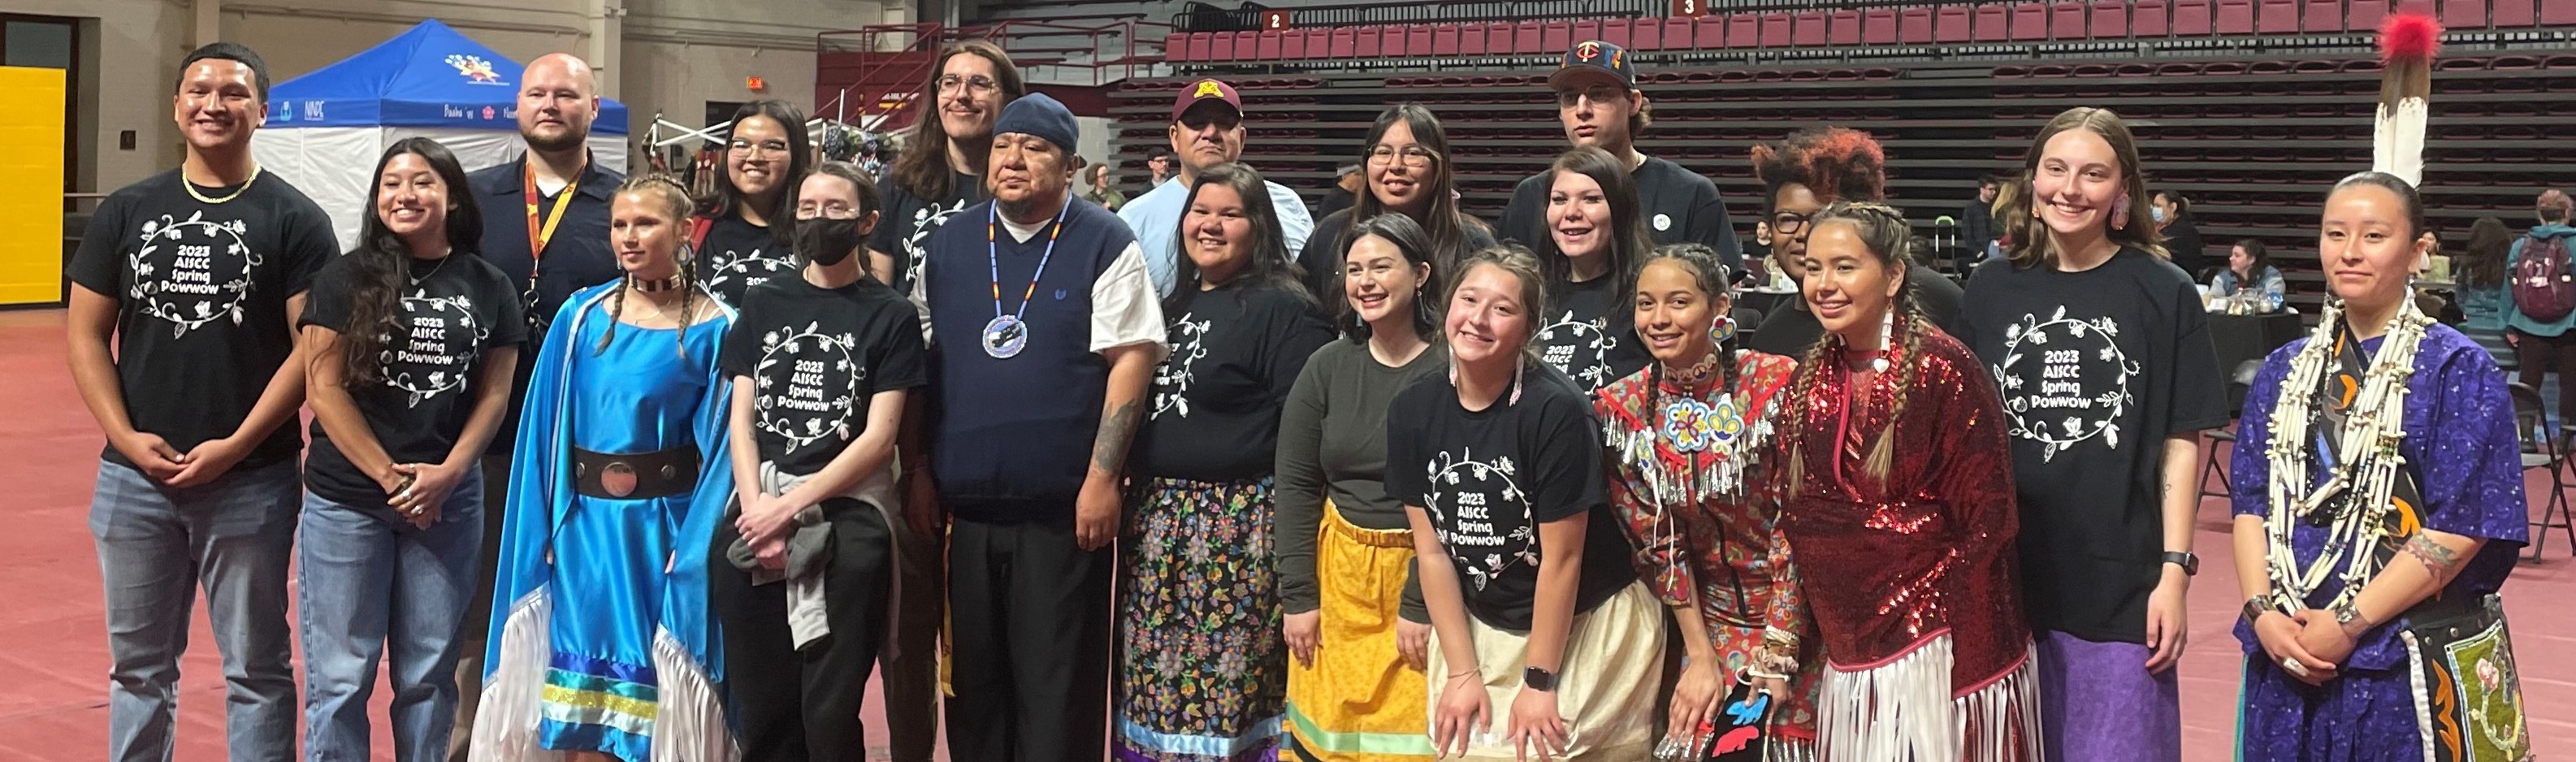 Members of the 2022-2023 AISCC Board stand alongside American Indian and Indigenous graduates during a University Graduates honor and recognition. Photographed at the UMNTC 2023 Spring Powwow